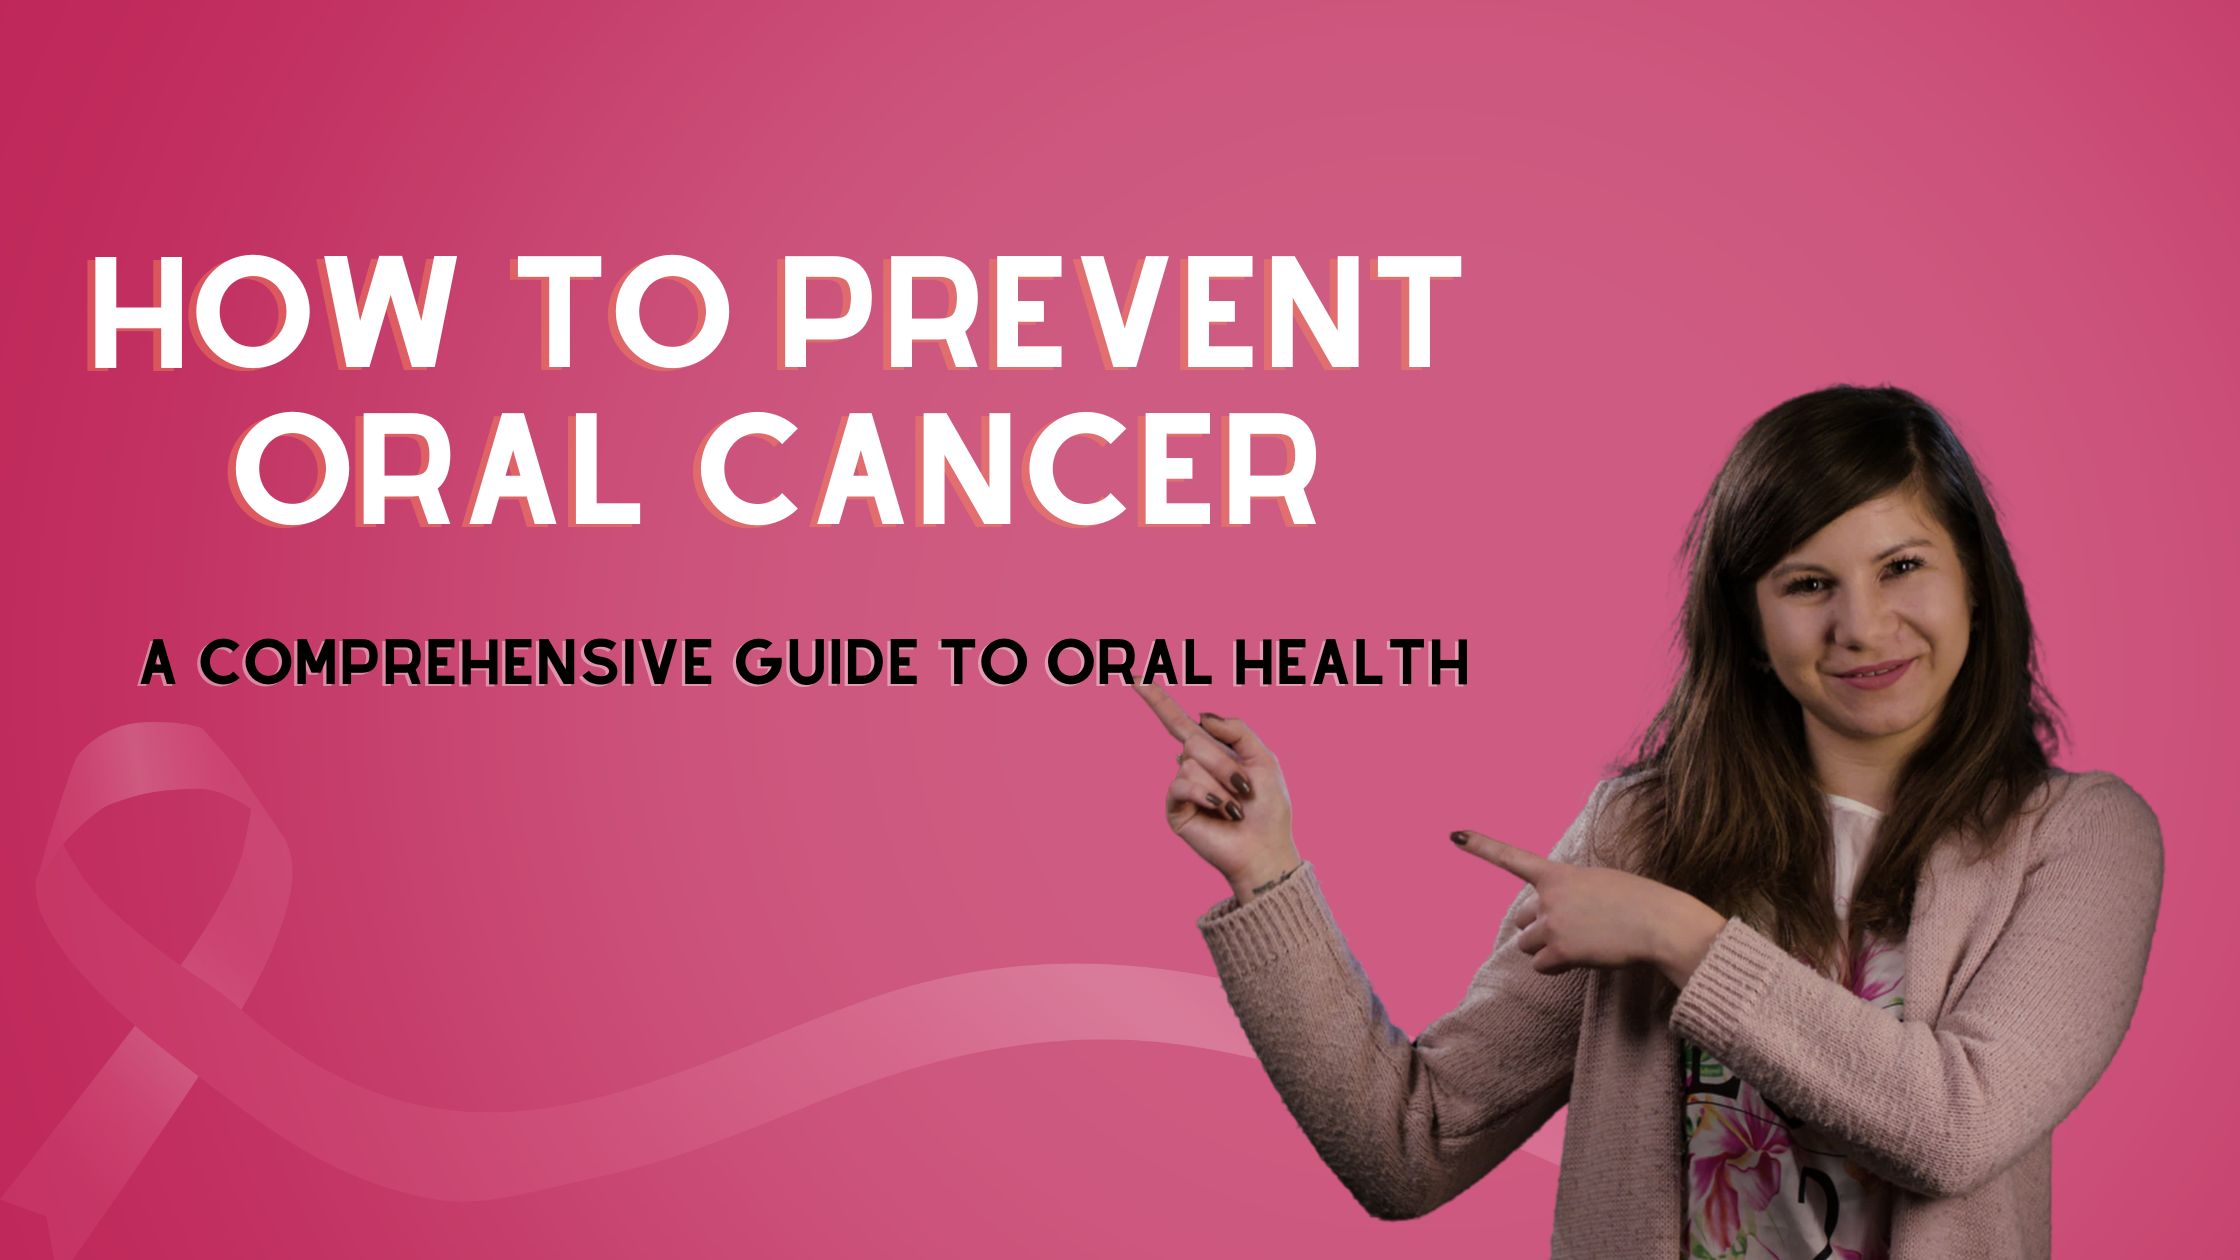 A Comprehensive Guide To Oral Health